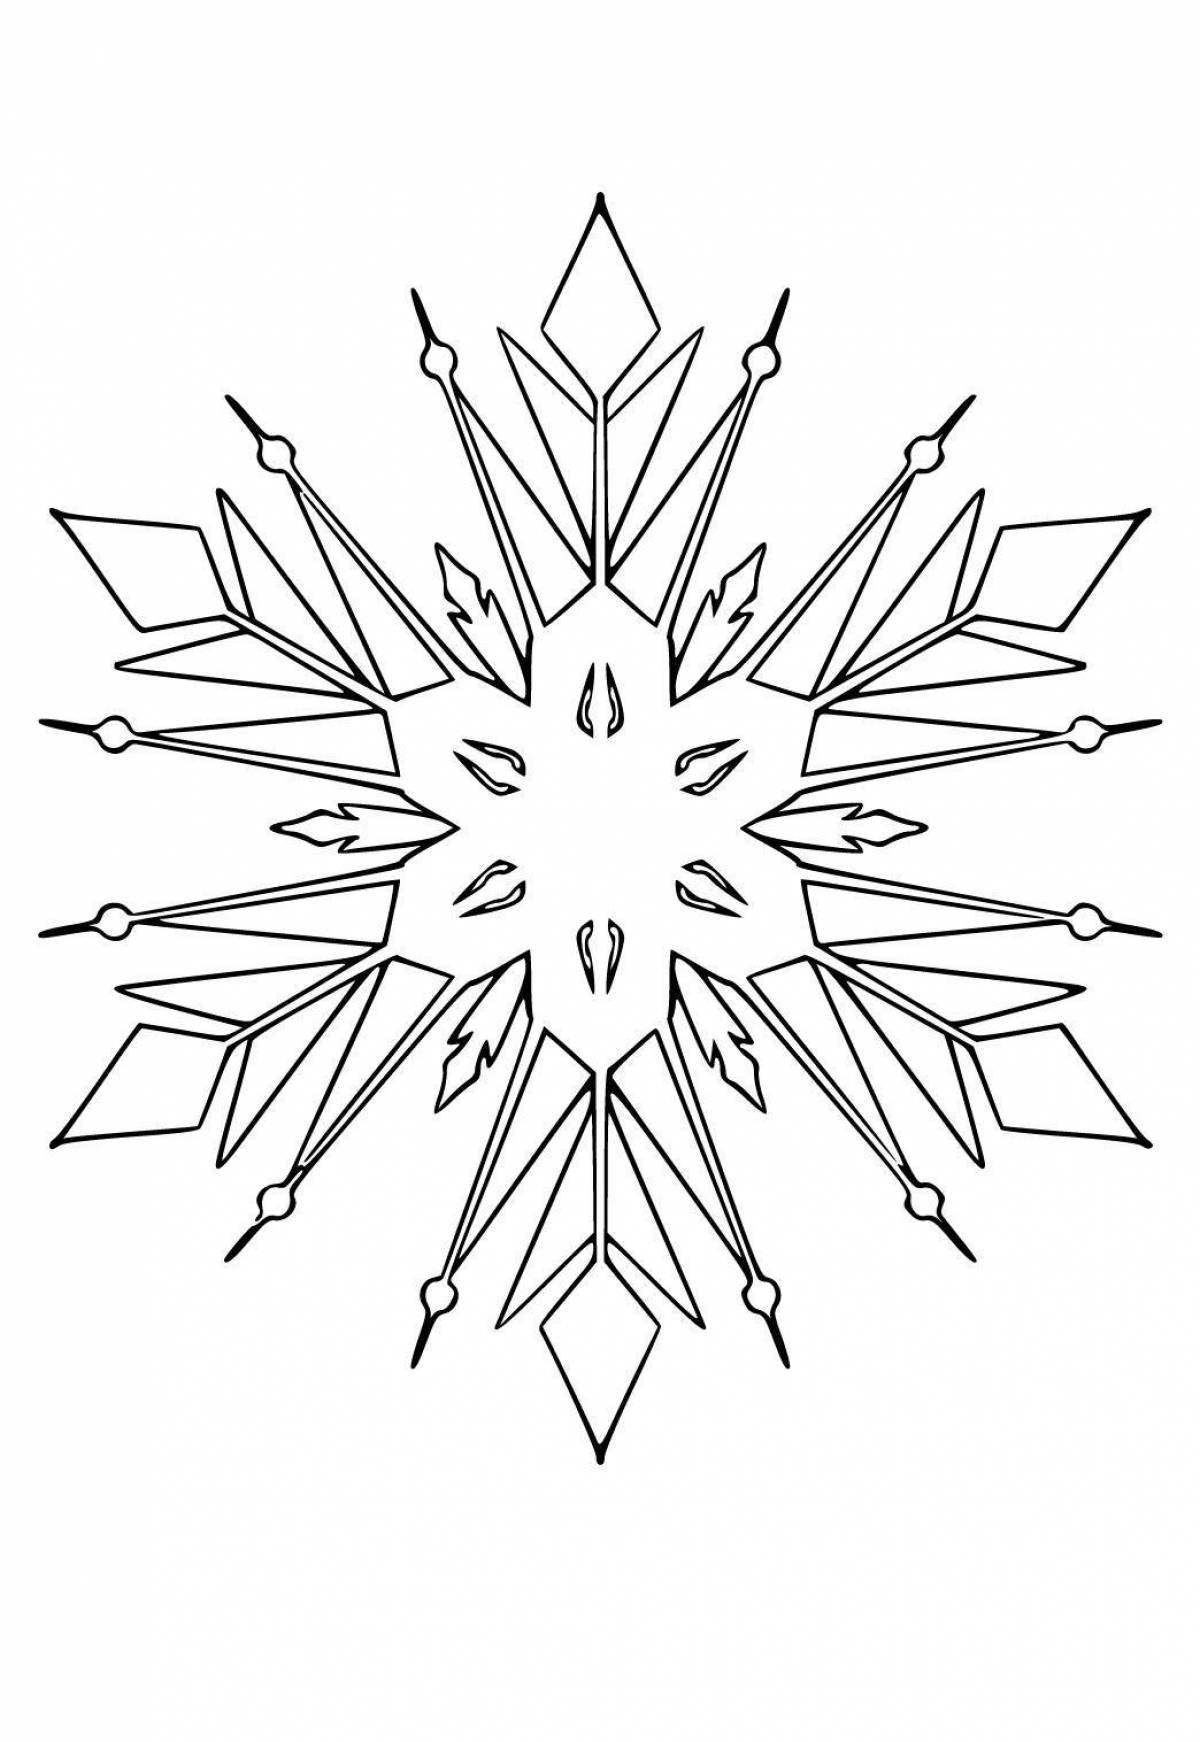 Nice snowflake coloring book for kids 6-7 years old